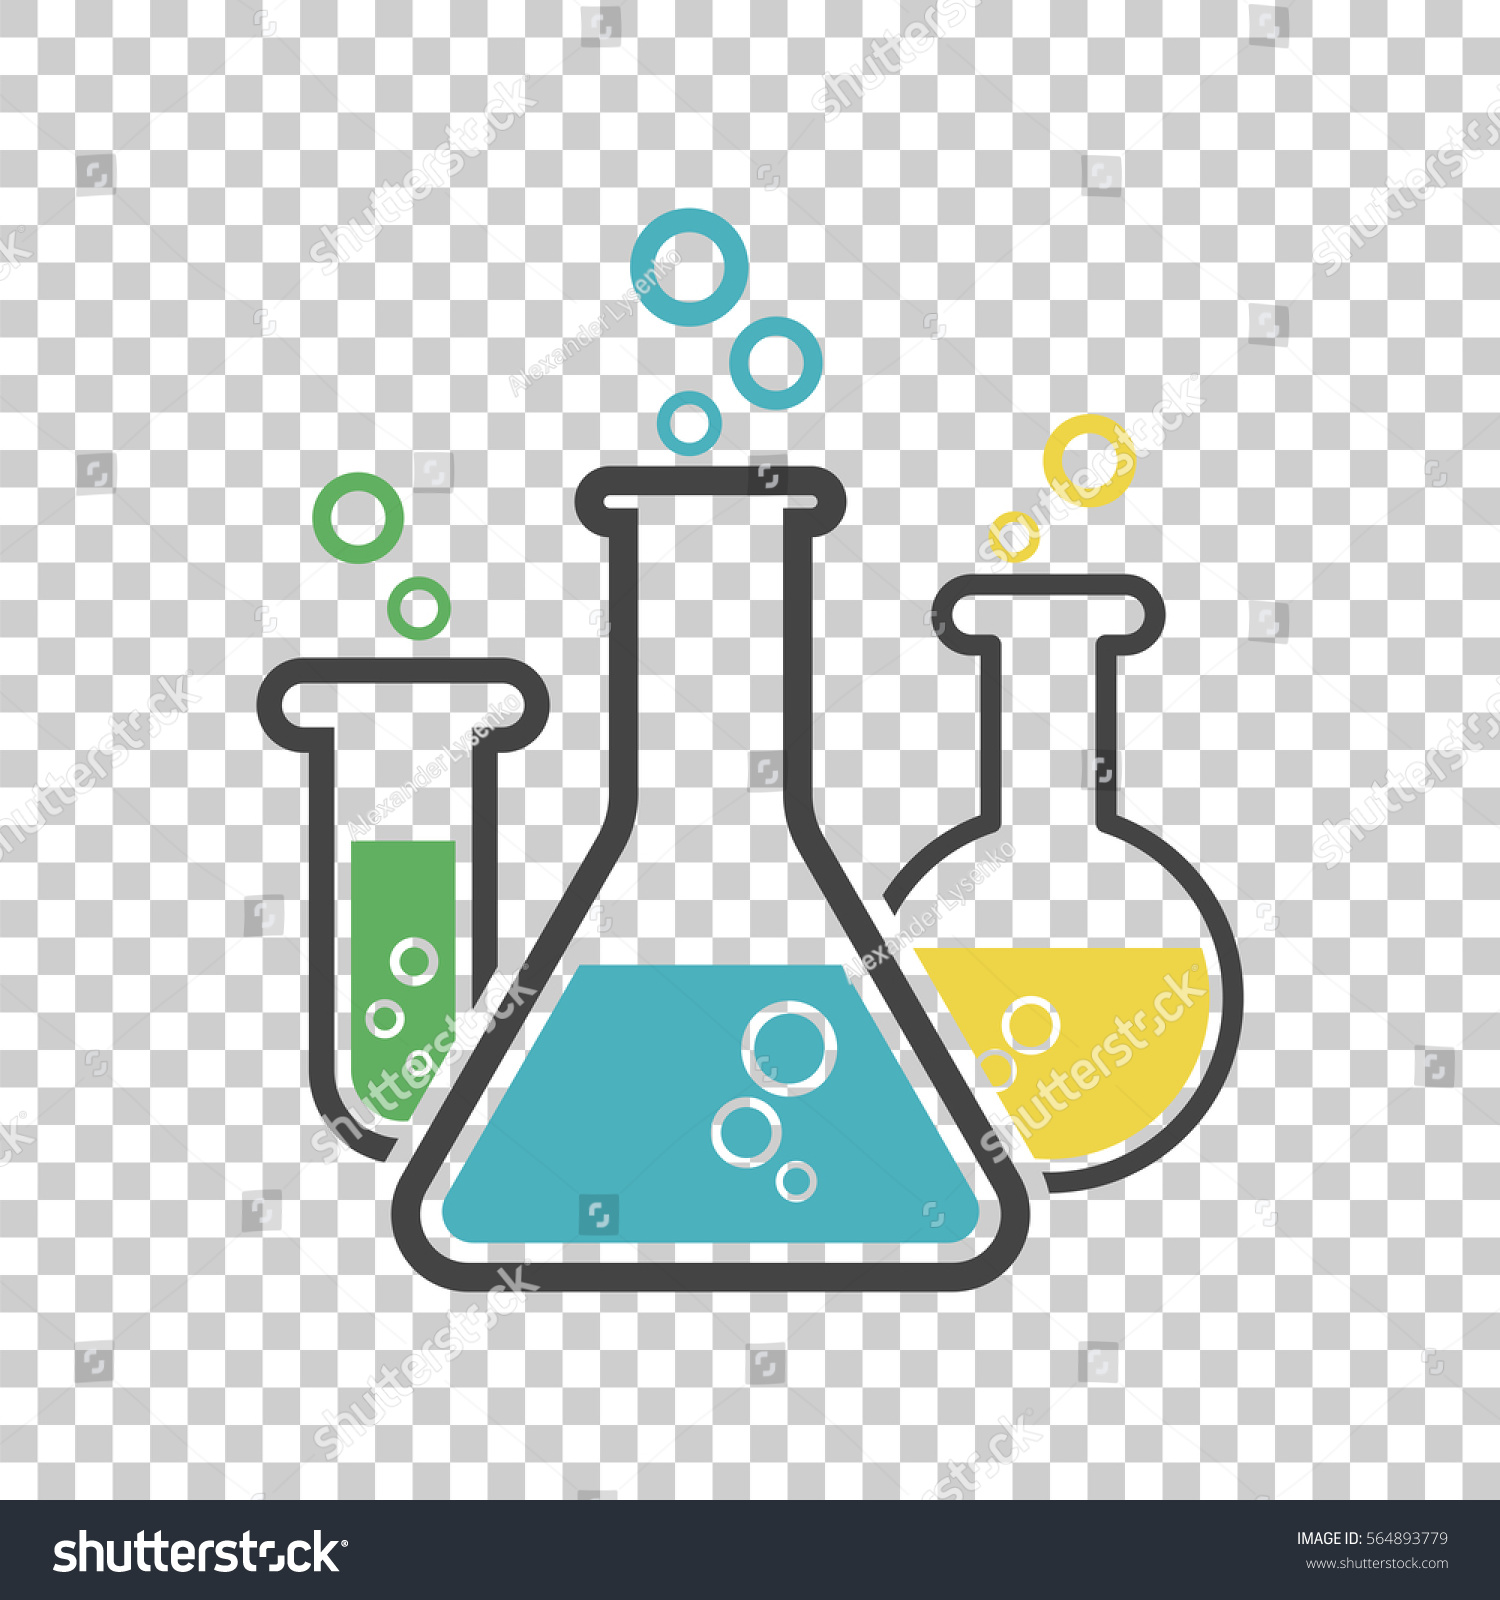 Chemical Test Tube Pictogram Icon Laboratory Stock Vector 564893779 ...